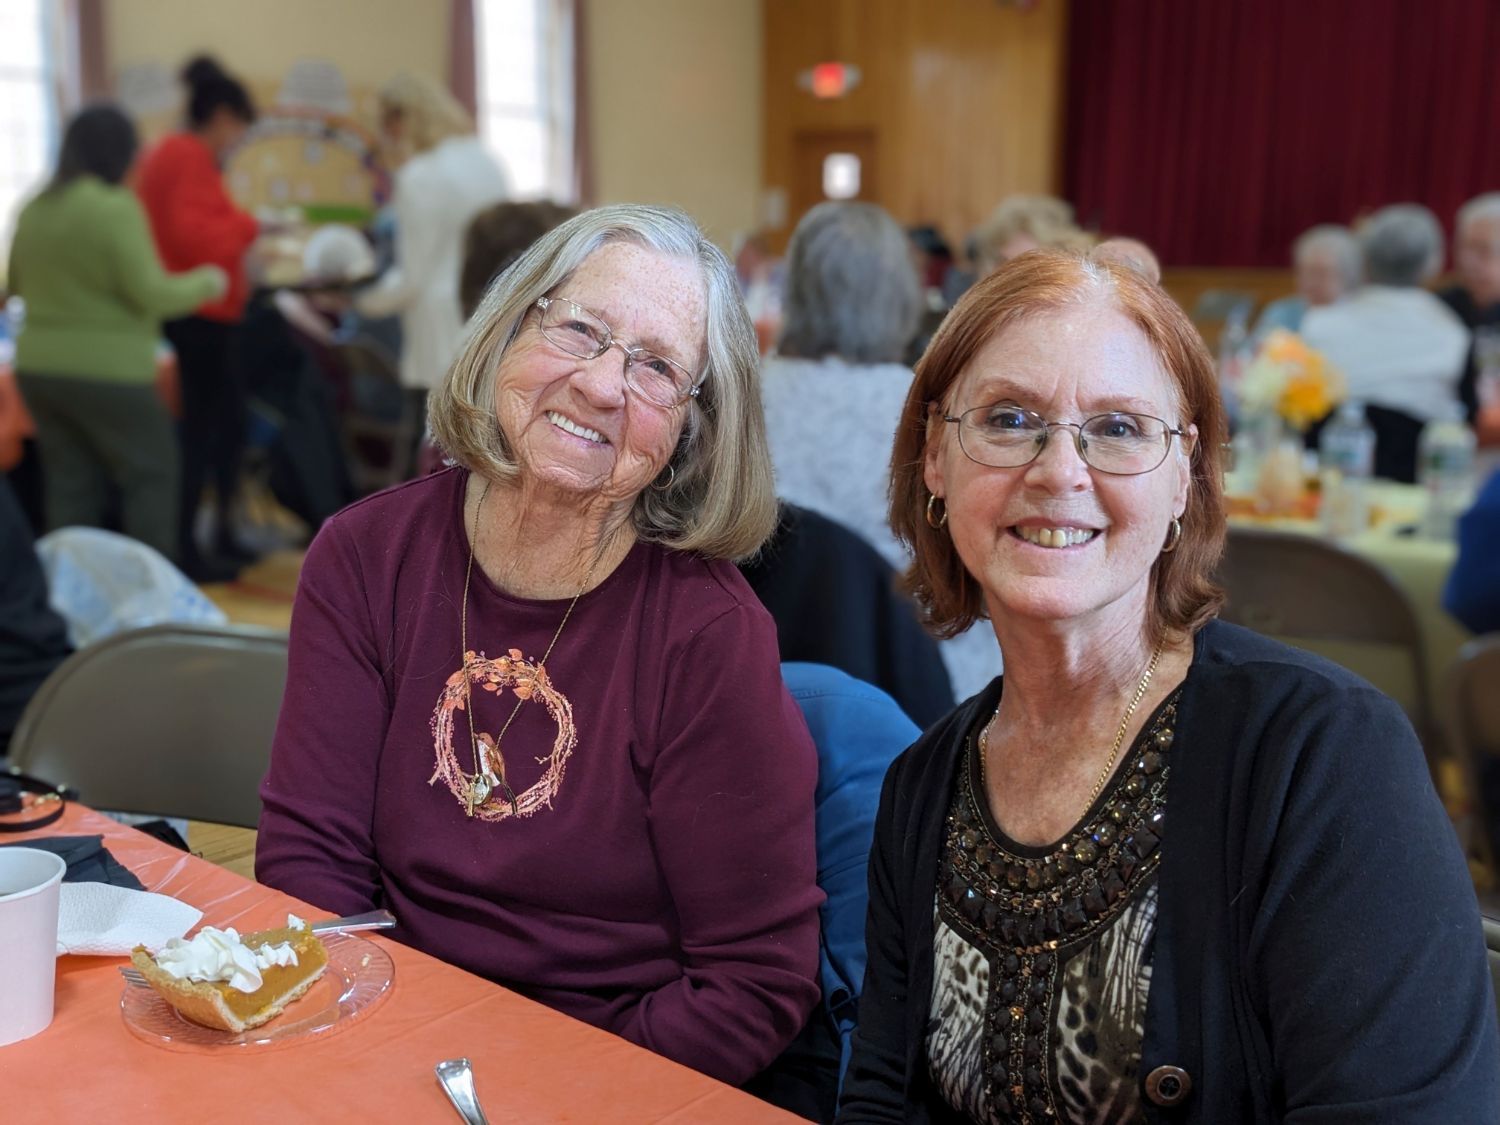 Two women smiling at Thanksgiving meal